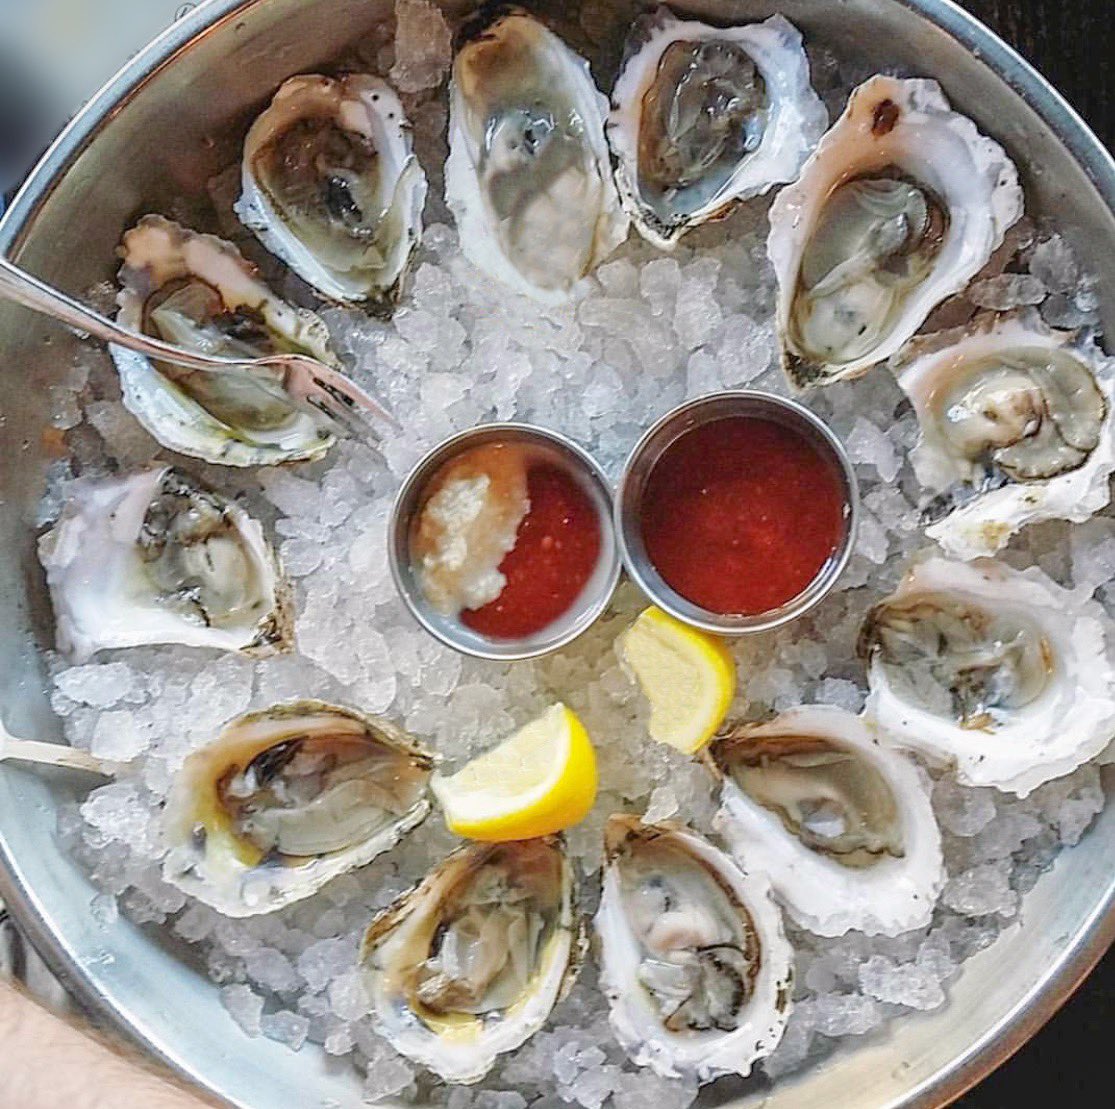 Today is #NationalOystersOnTheHalfShellDay and we’re celebrating with $1 Wicked Pissah oysters ALL day! #Fordsfishshack #freshoysters